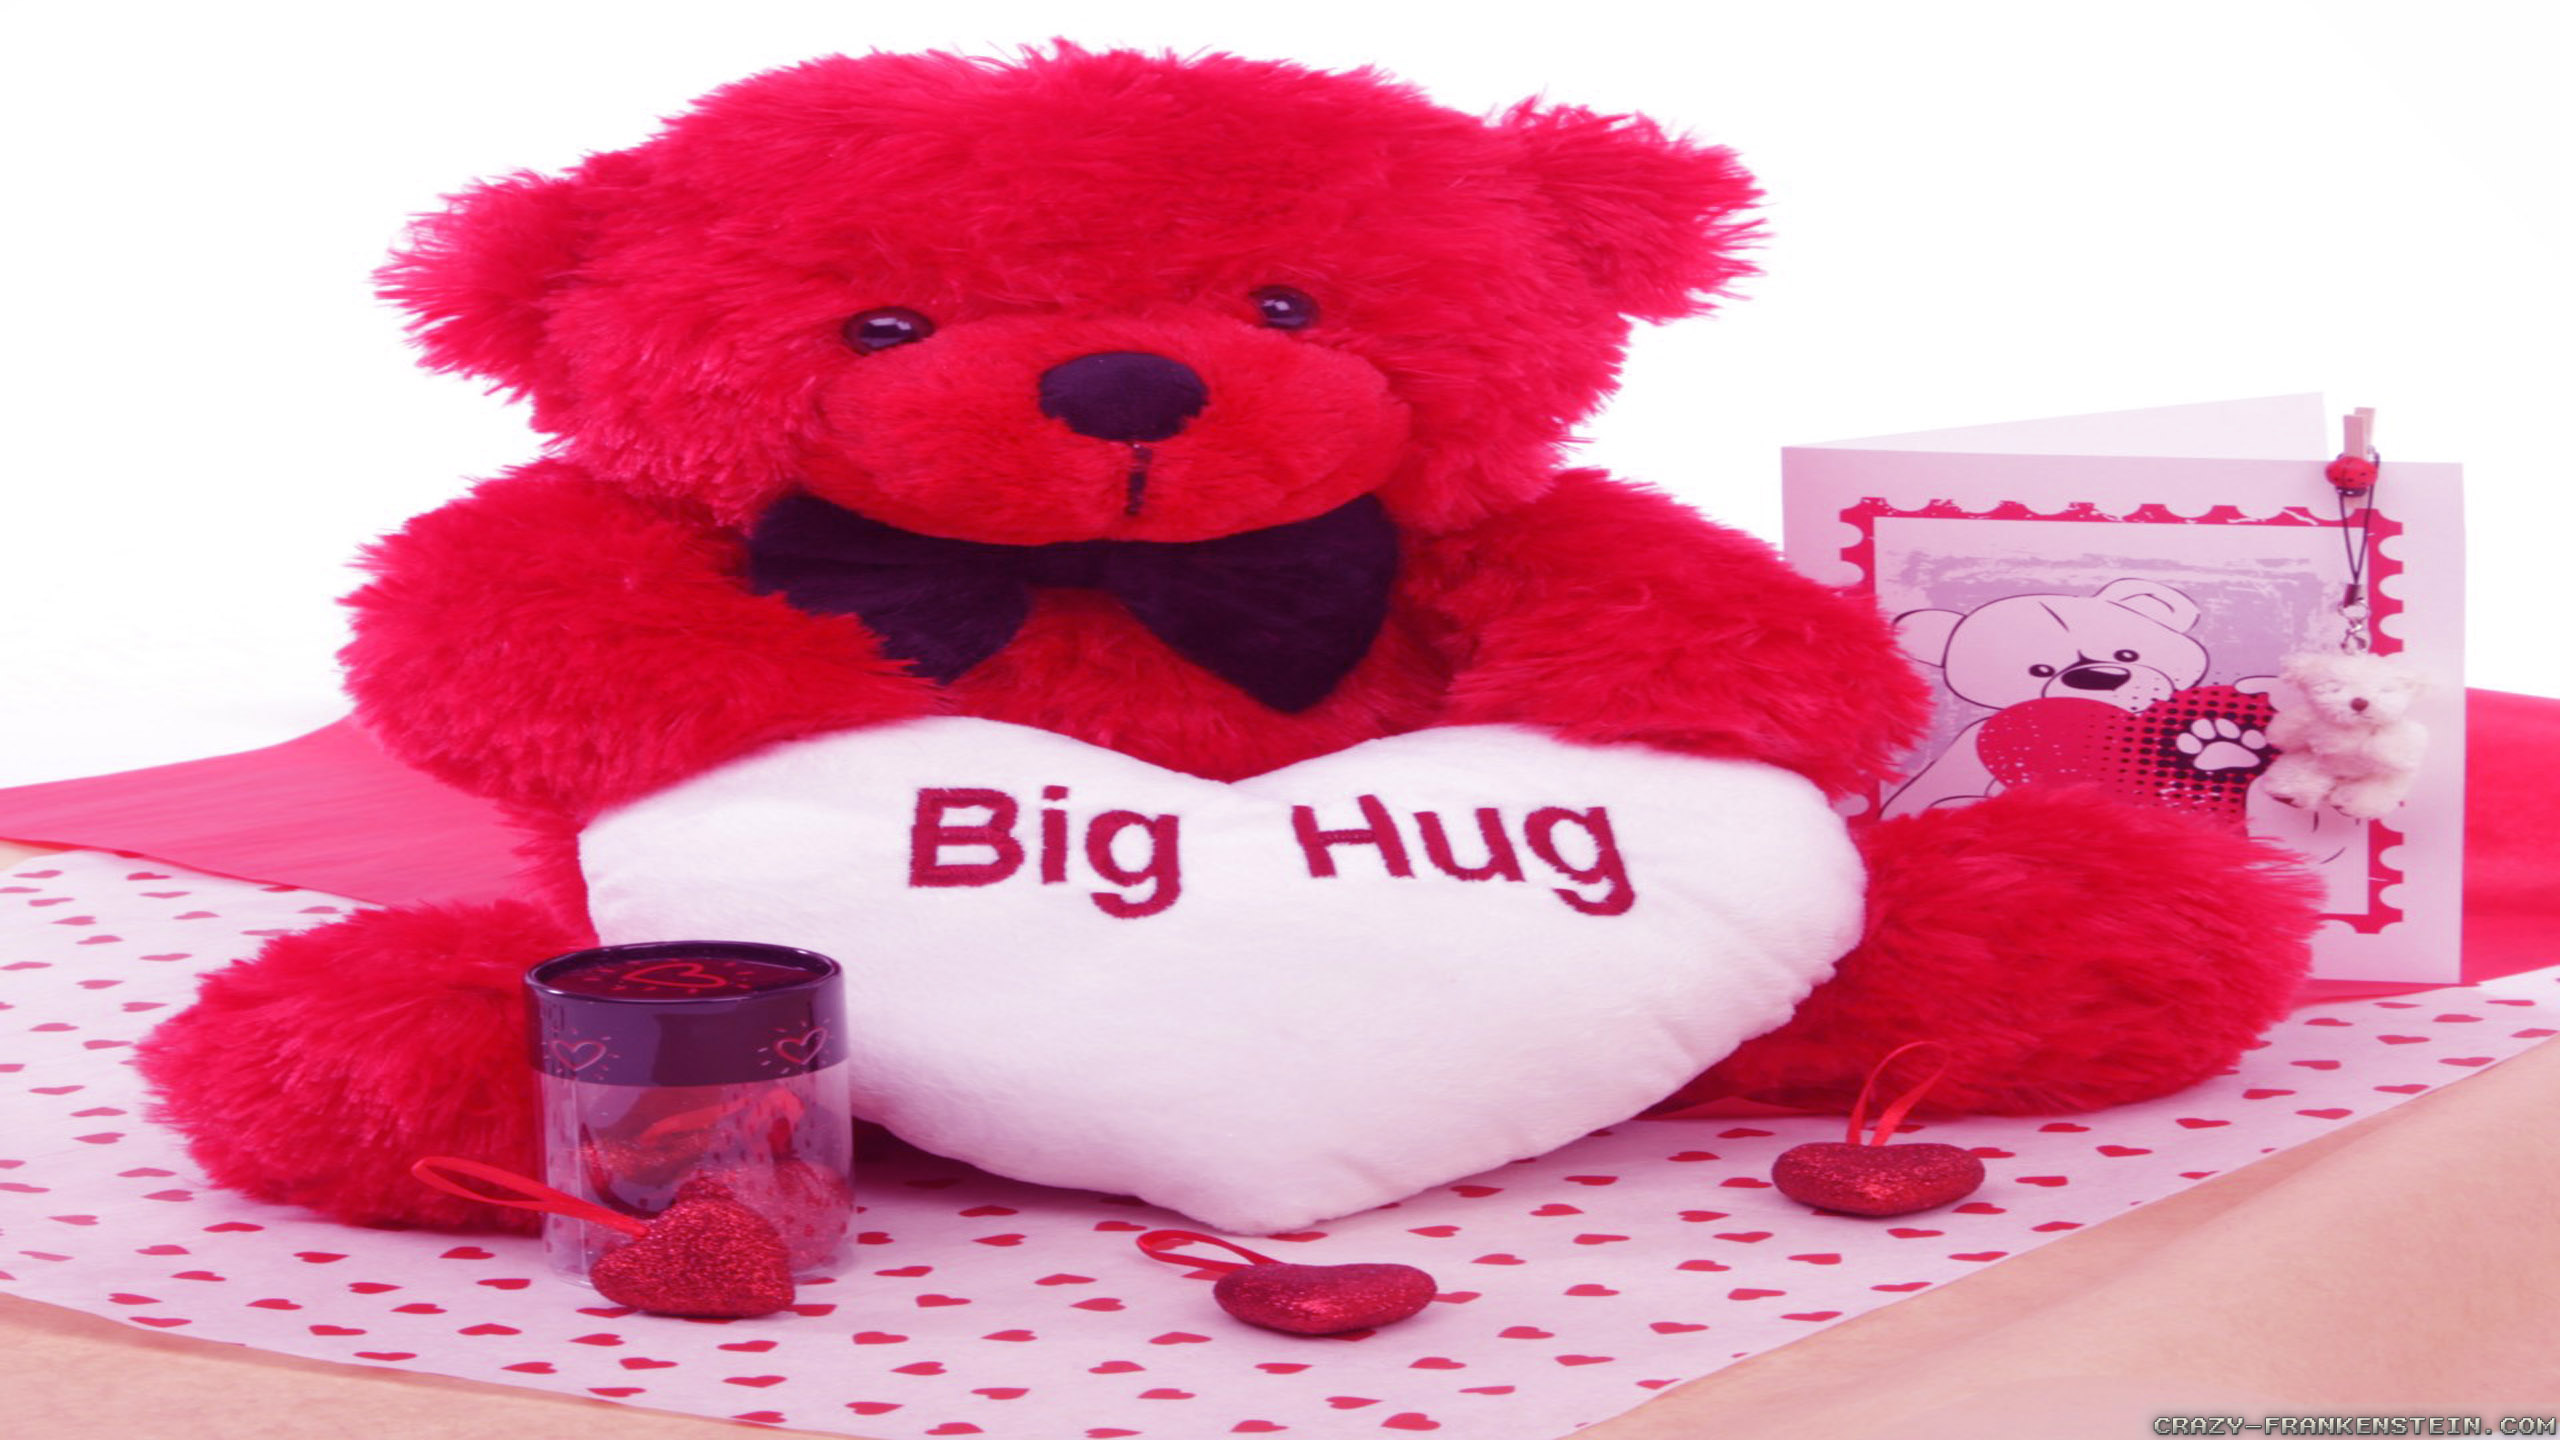 big pink teddy bear wallpapers,stuffed toy,teddy bear,toy,red,pink